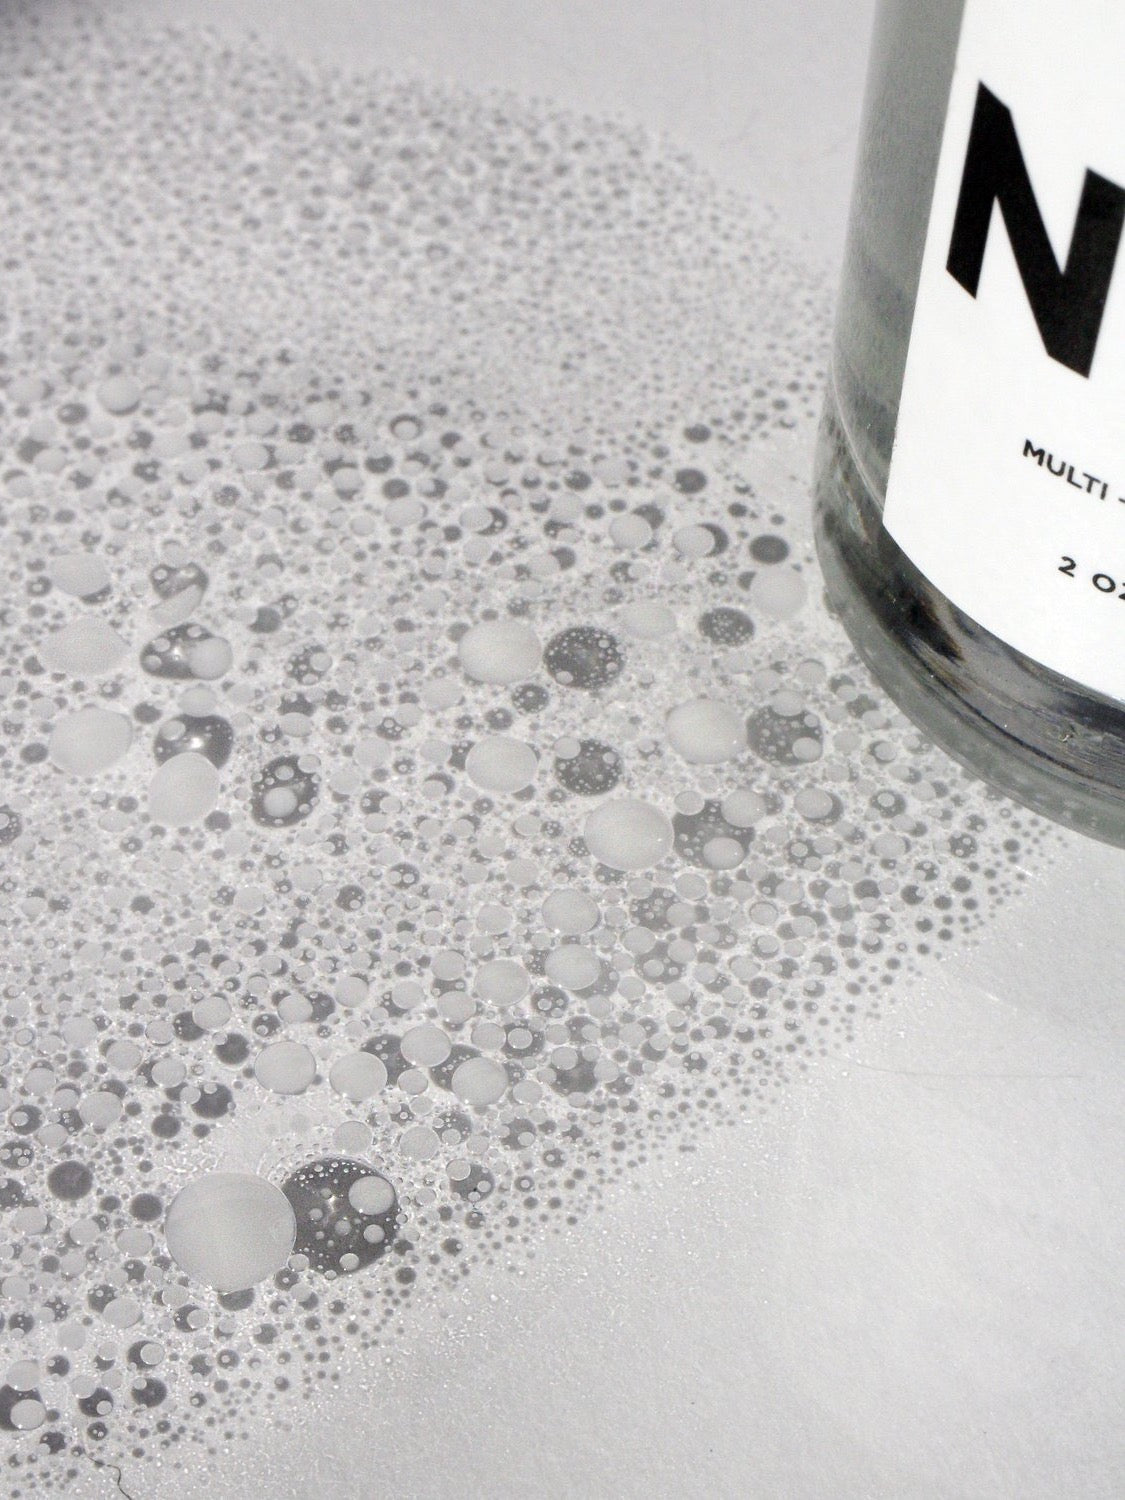 A bottle of NOTO Basil Yarrow Mist with bubbles on top of it.